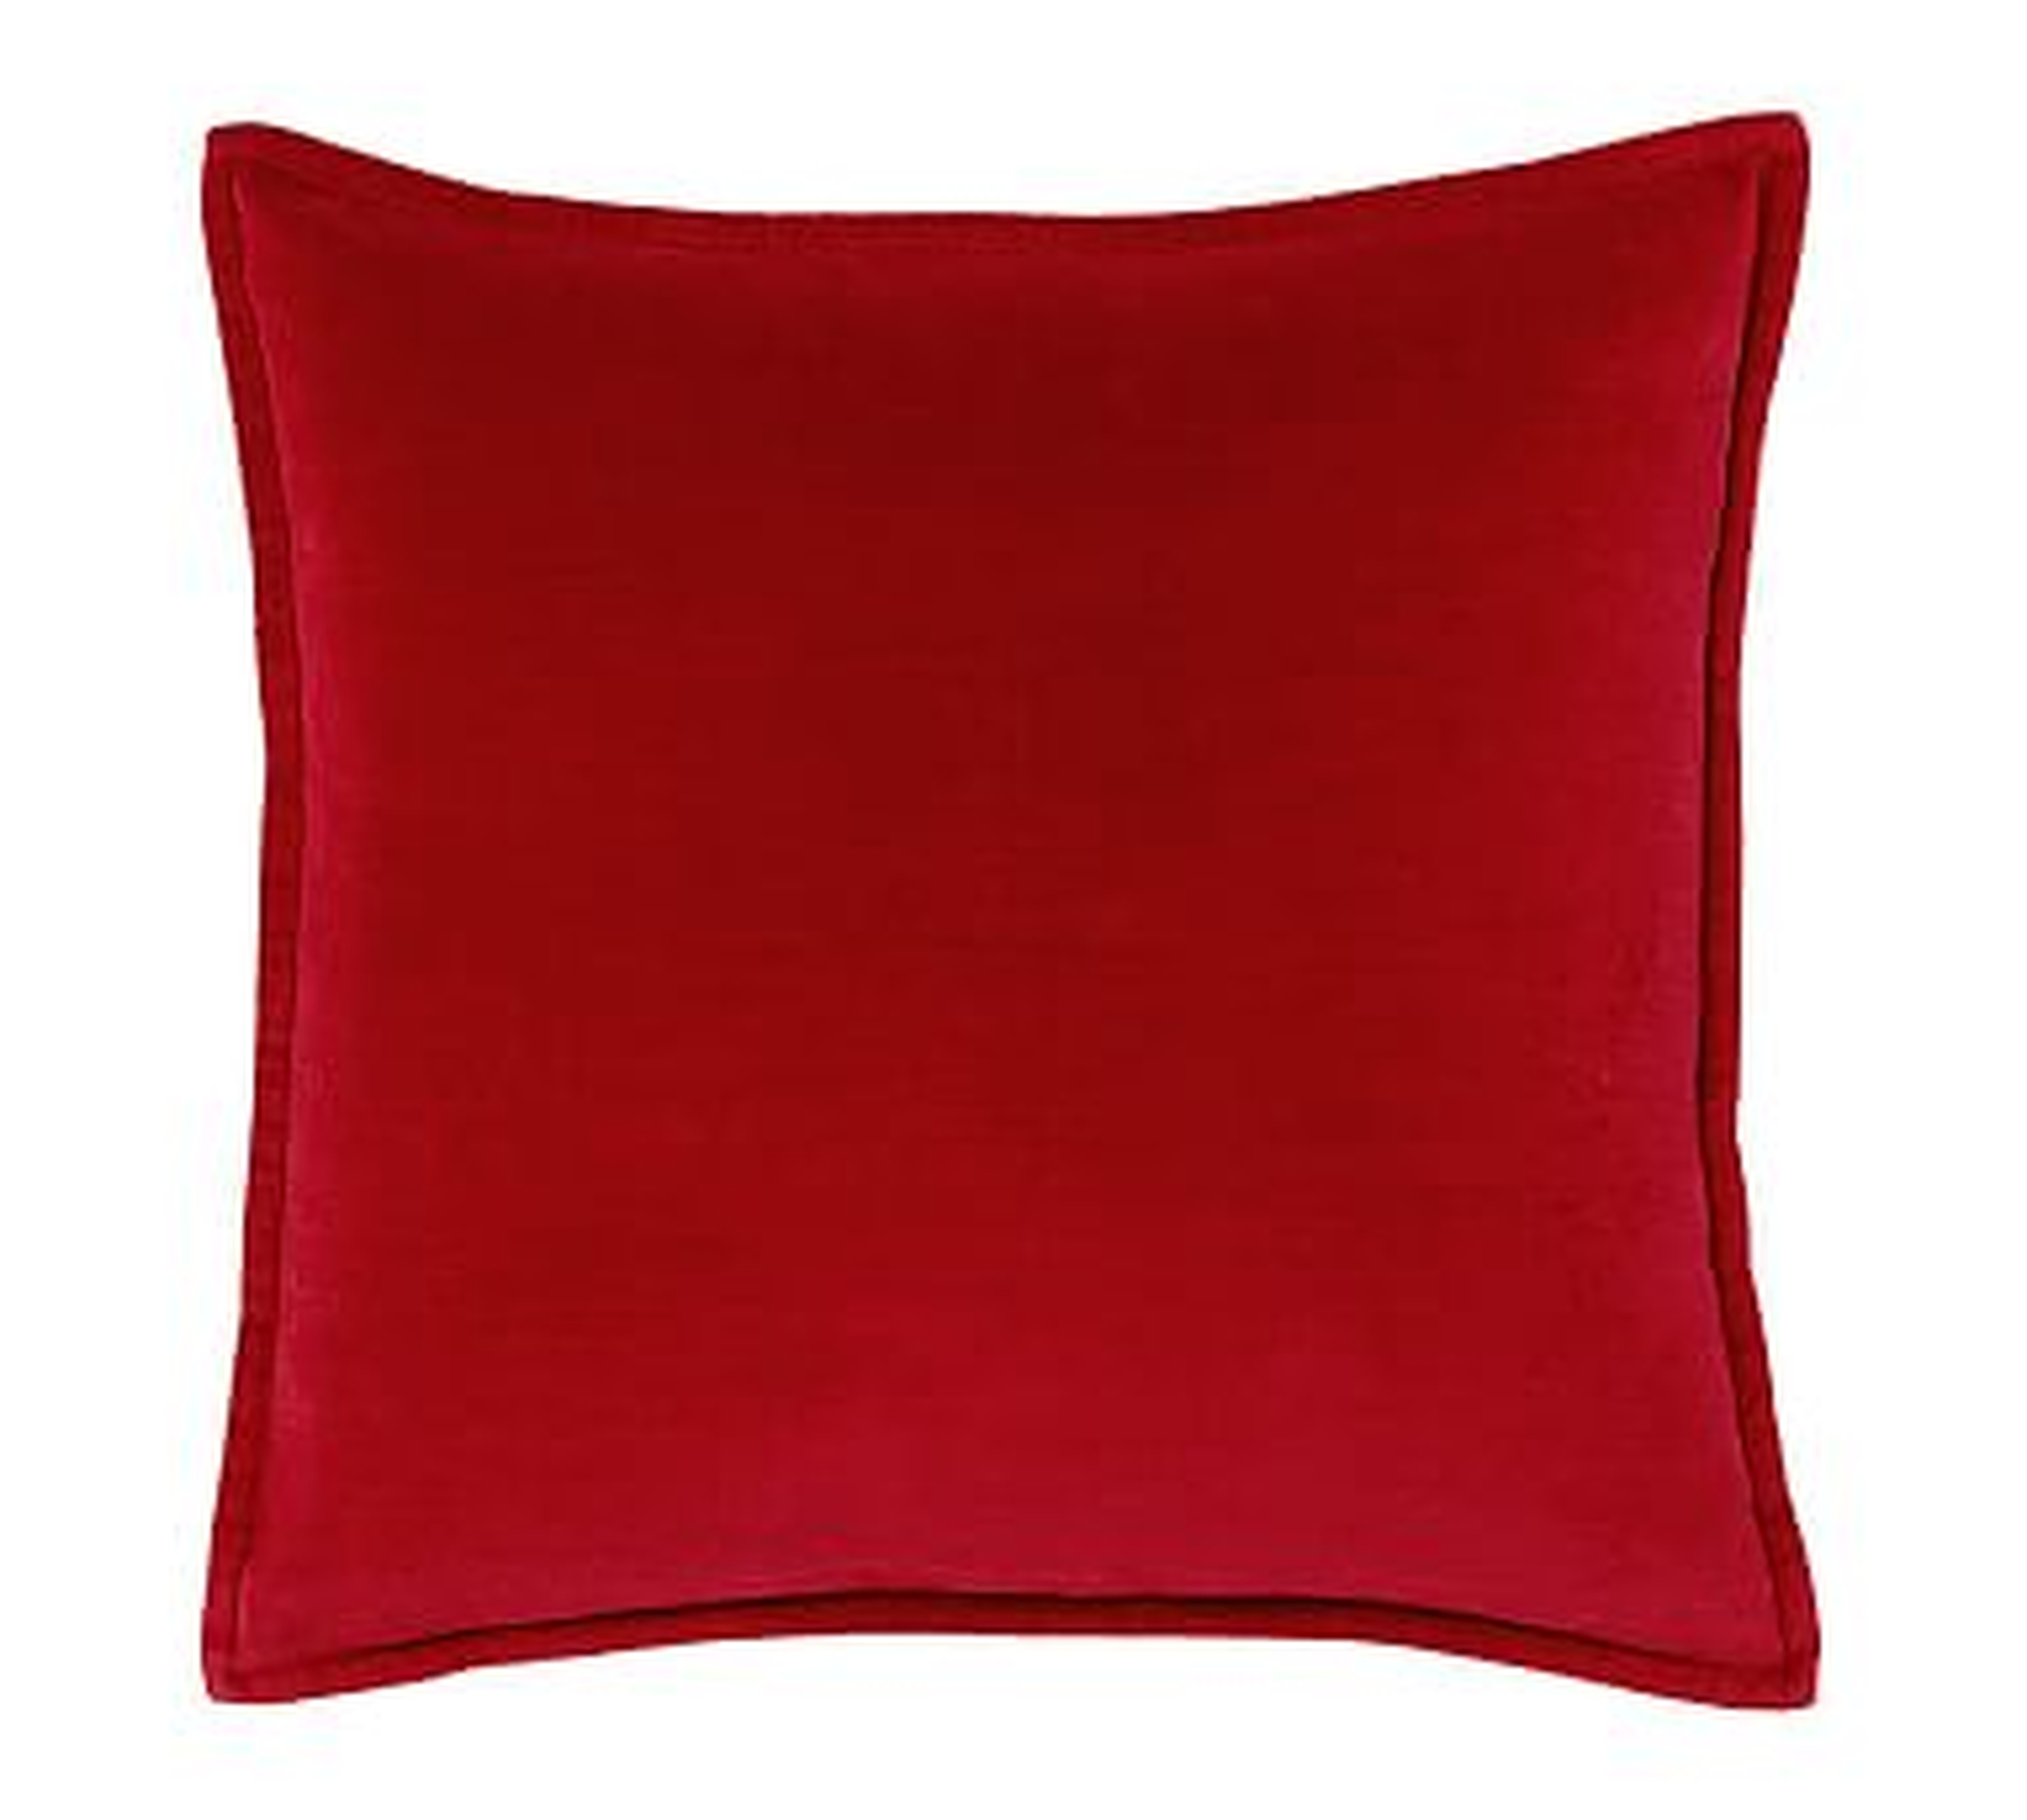 Washed Velvet Pillow Cover, 20", Cherry Red - Pottery Barn